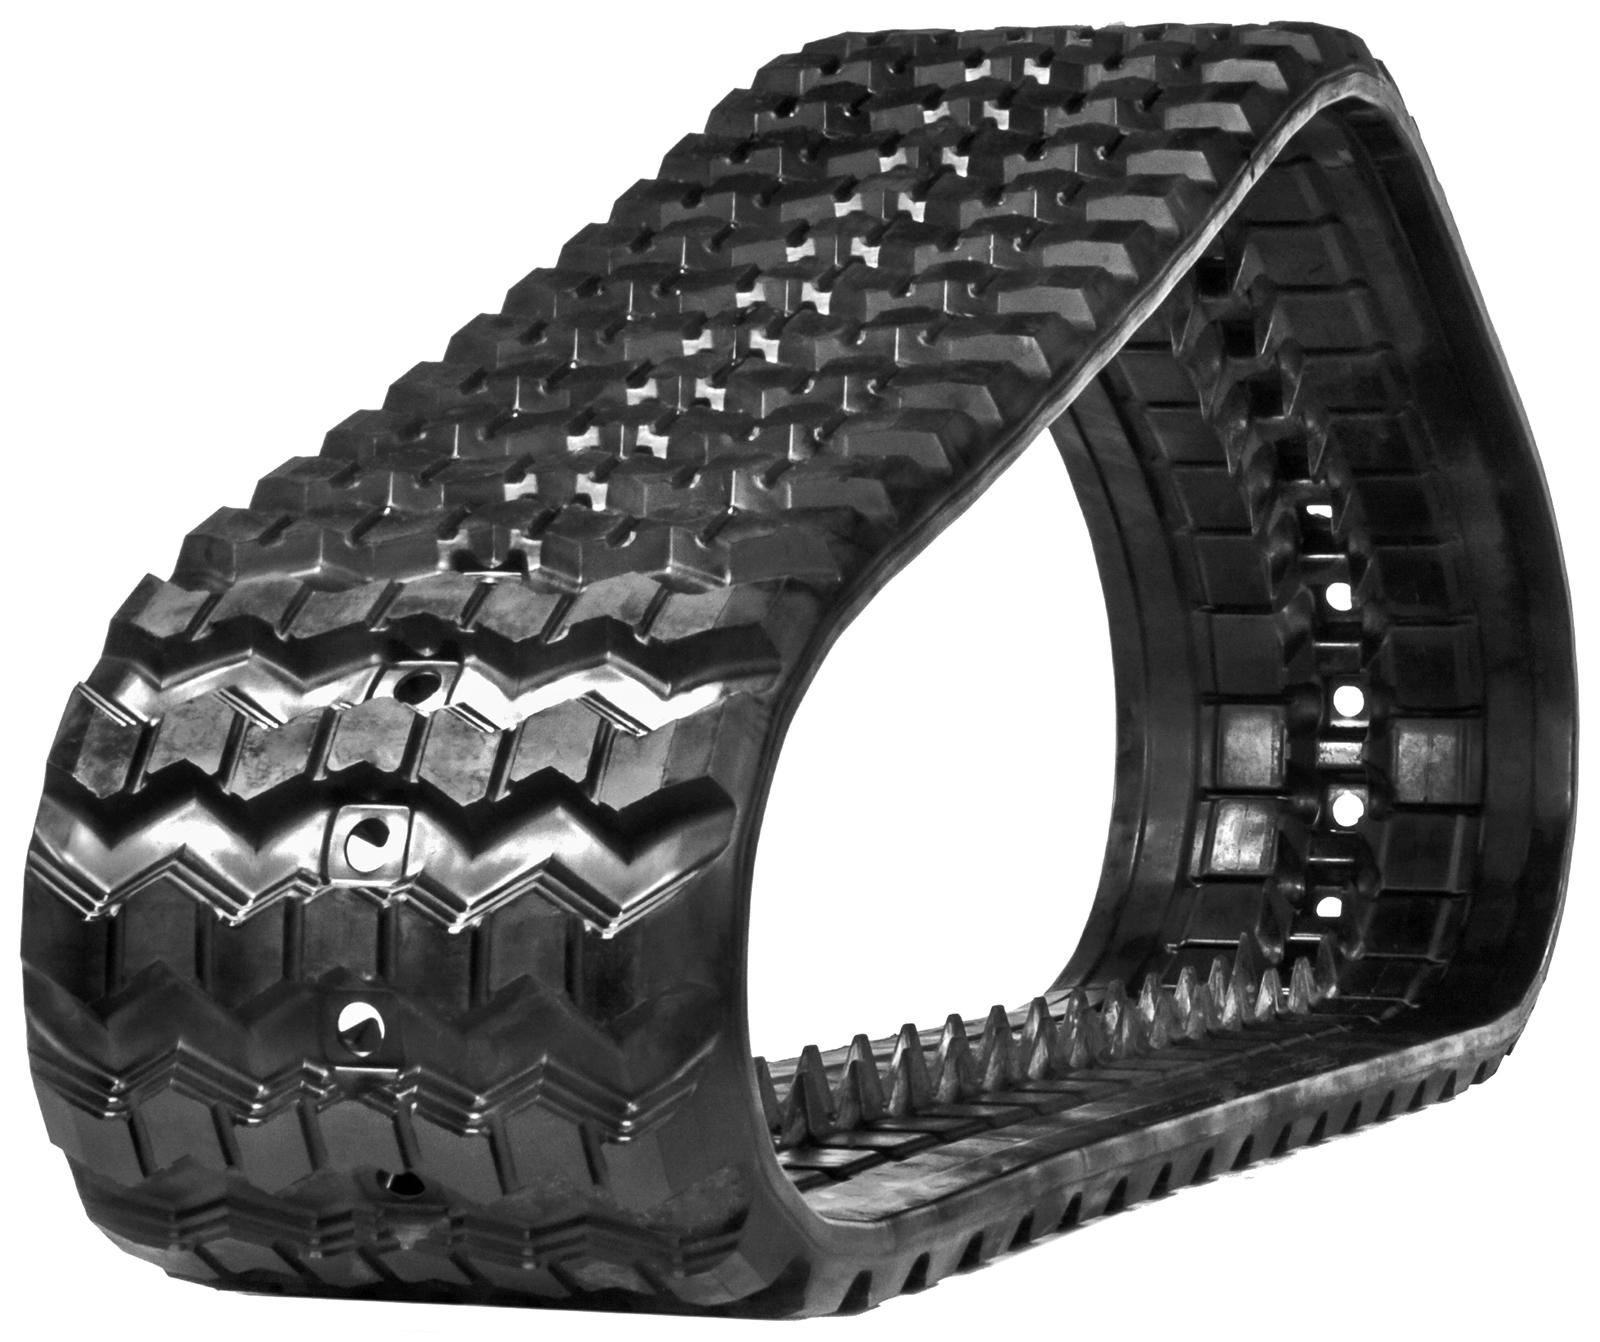 set of 2 18" camso heavy duty sawtooth pattern rubber track (450x100x48)